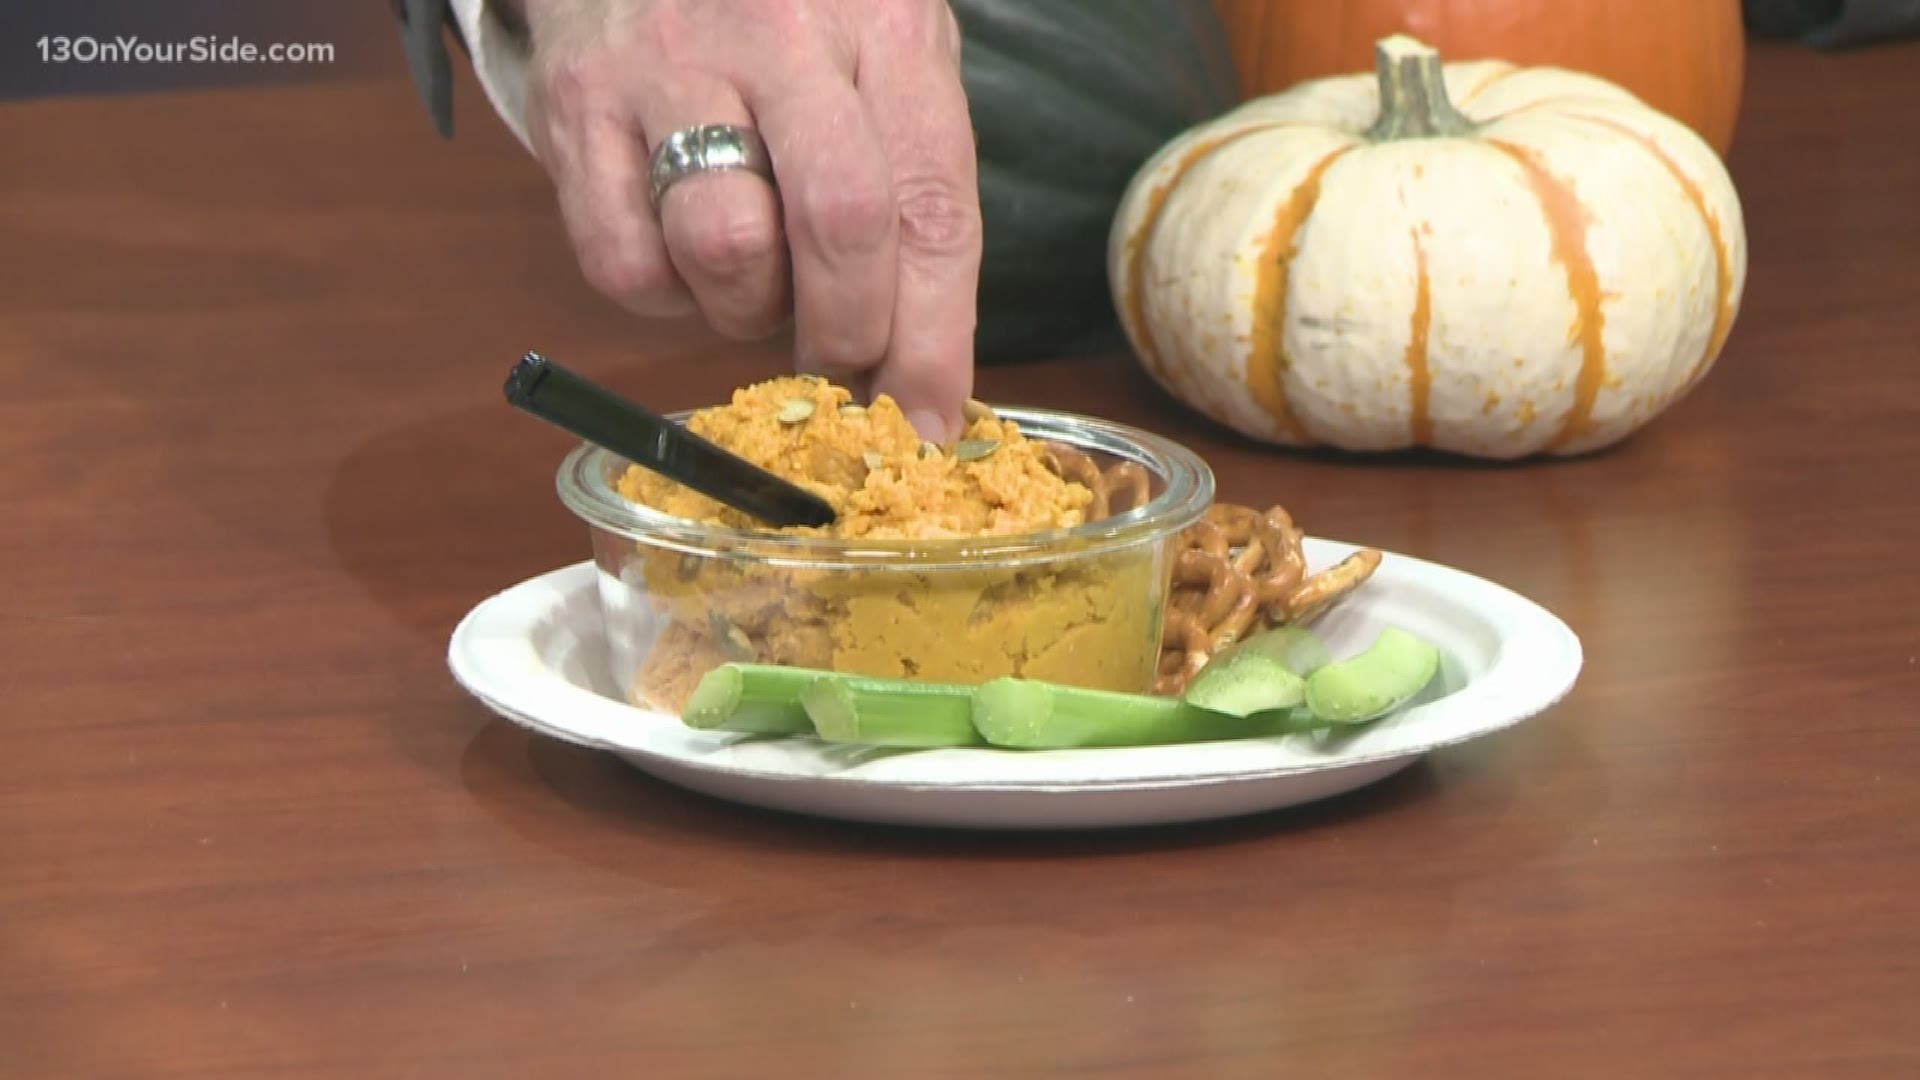 Fall brings pumpkin season and there is a lot you can do with this nutrient-dense squash.